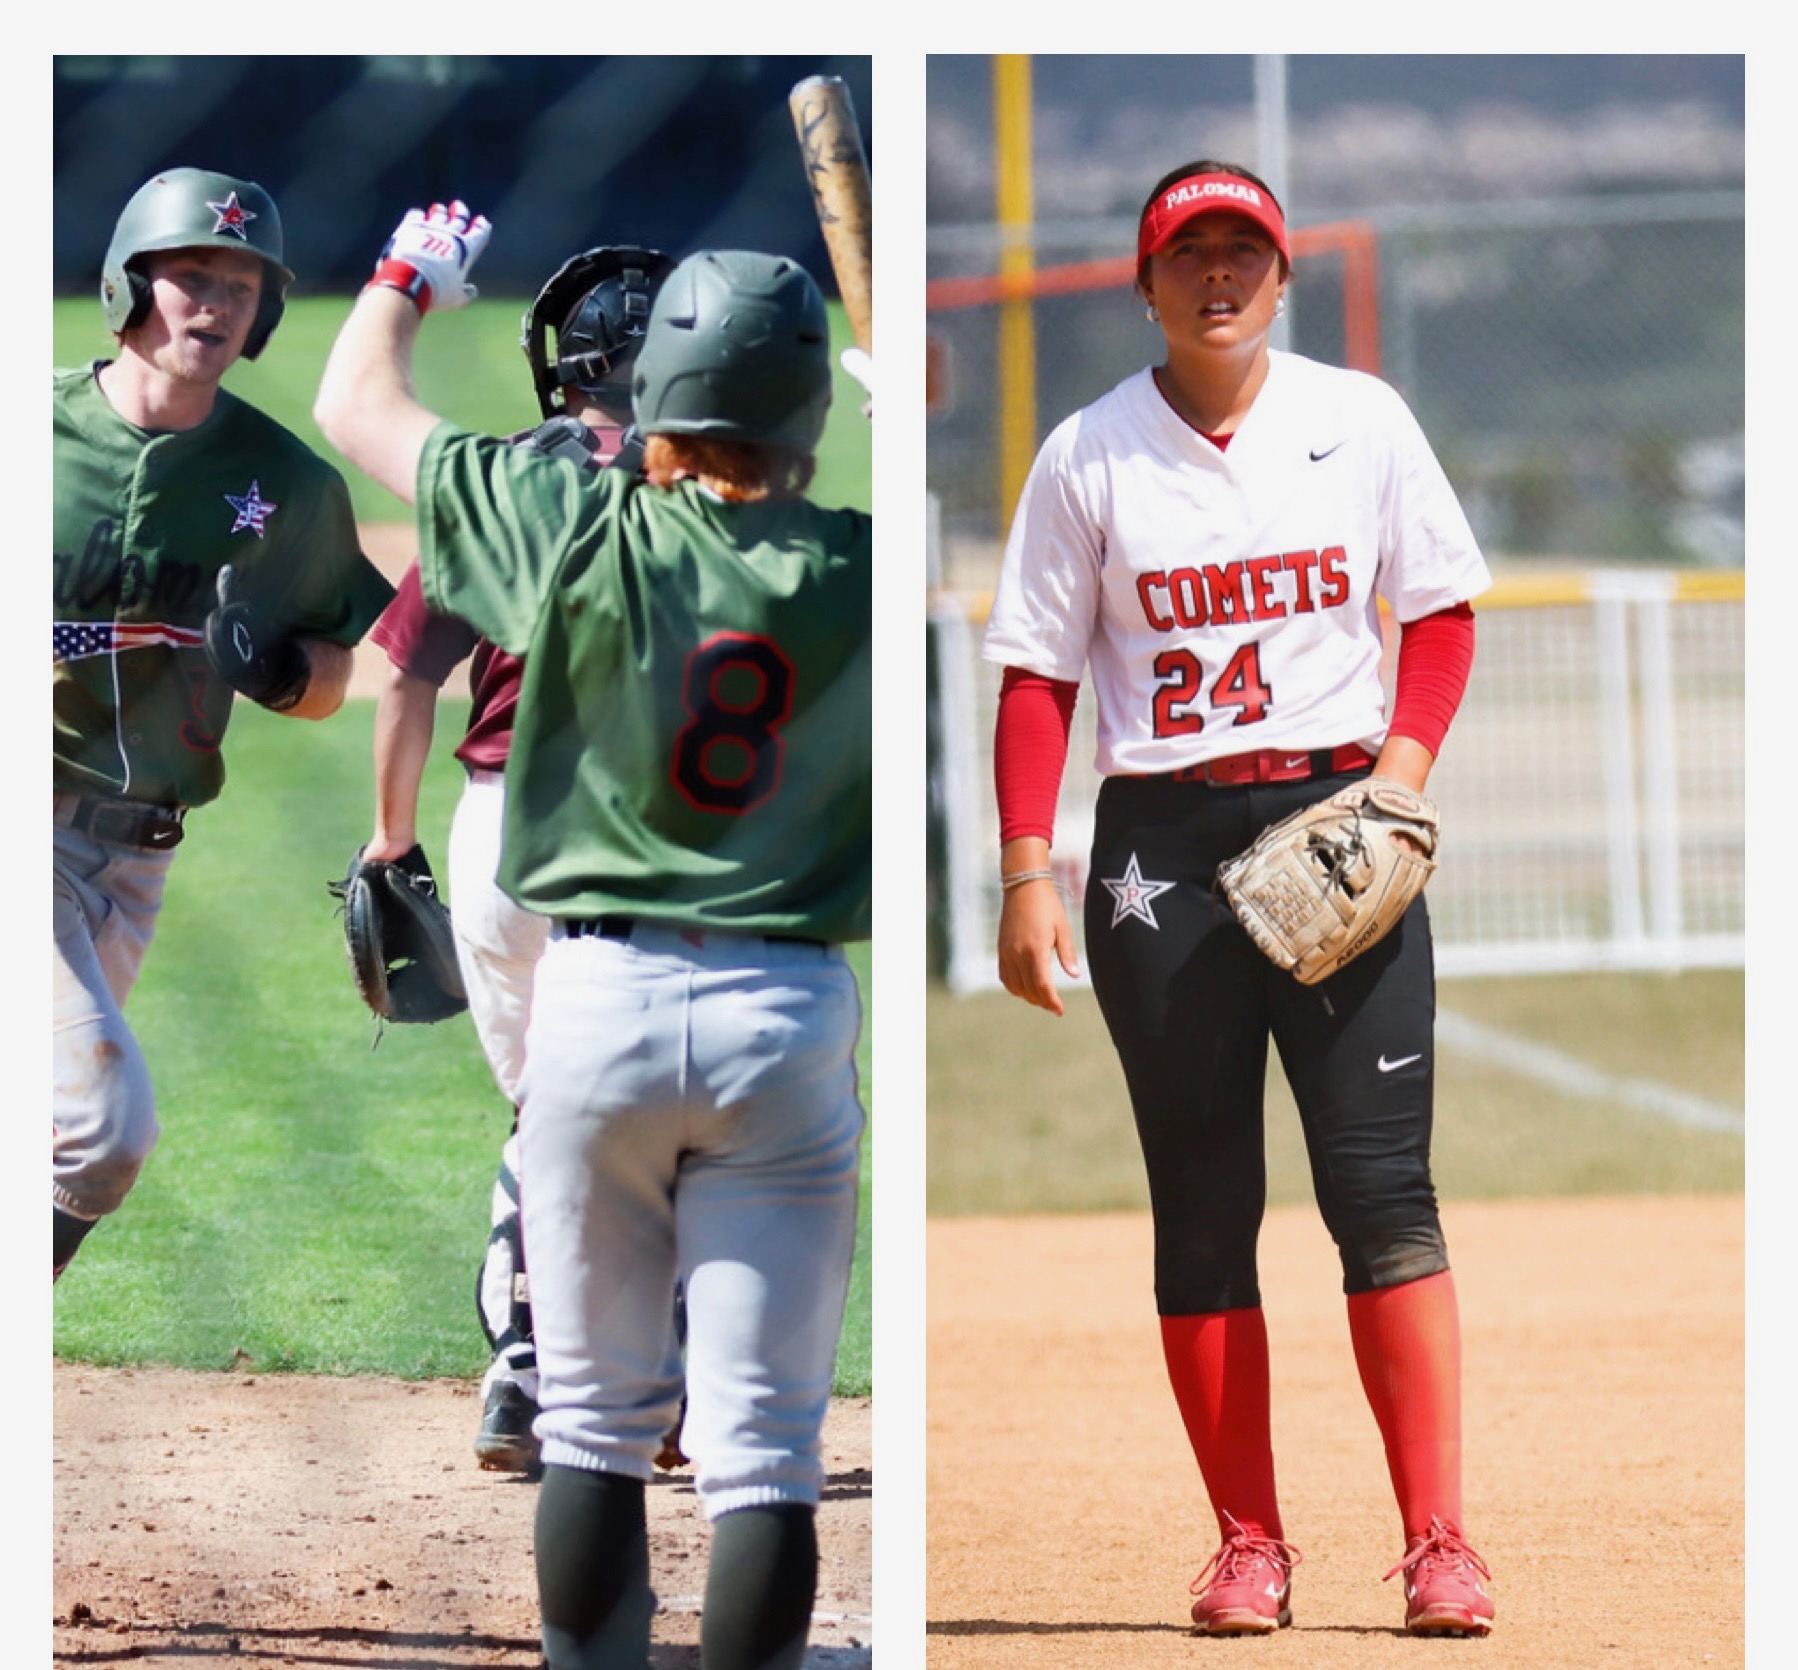 Three Palomar baseball players wearing green jersies and white pants greet each other on the baseball field on the left panel of the picture frame. Right panel shows a female Palomar softball player standing on the field with a catcher's mitt in her left hand.